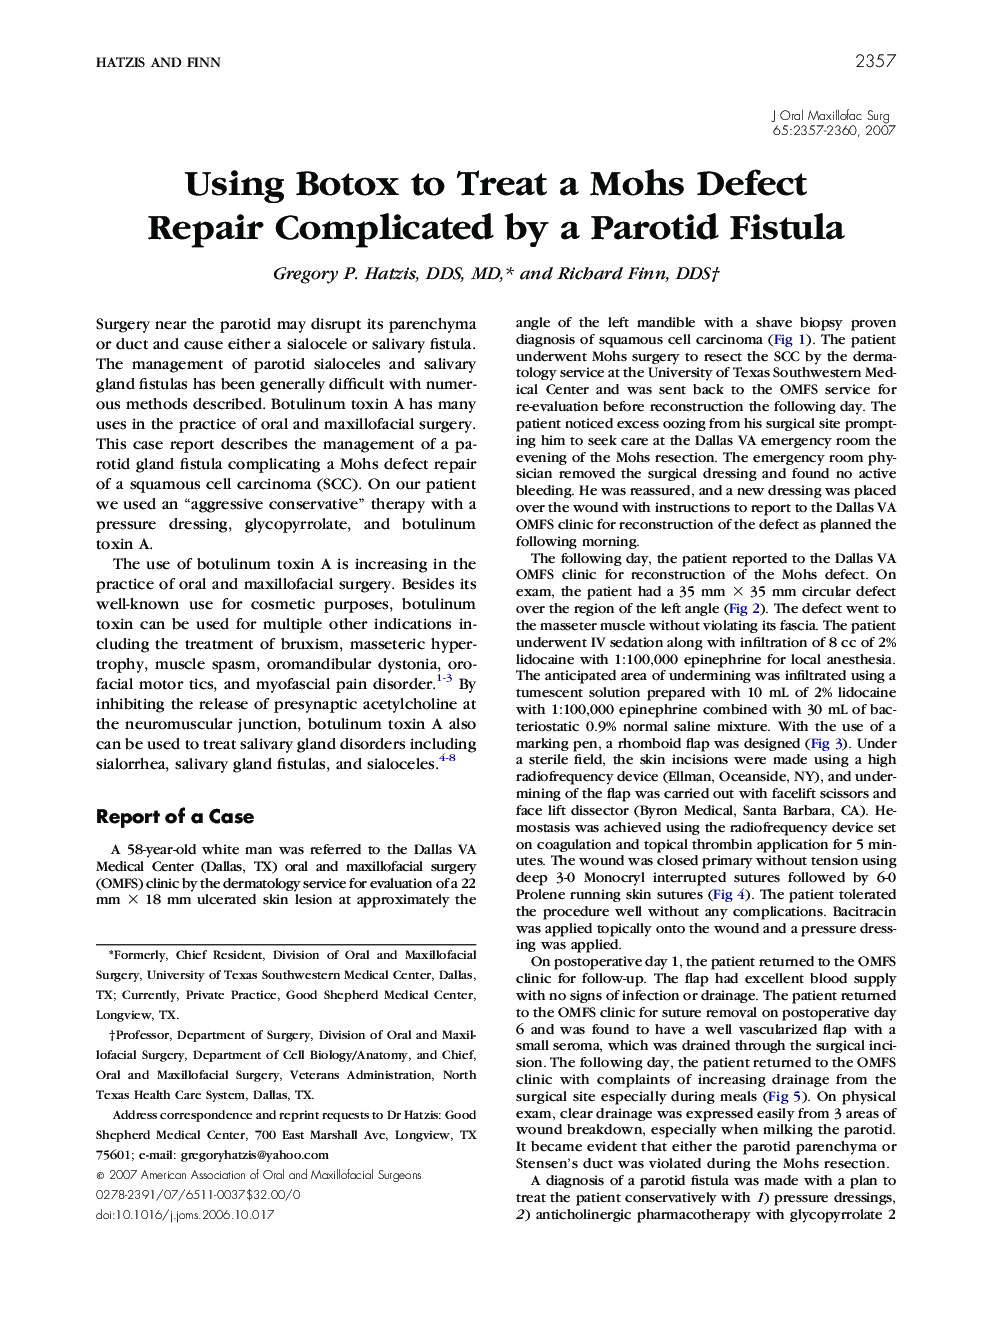 Using Botox to Treat a Mohs Defect Repair Complicated by a Parotid Fistula